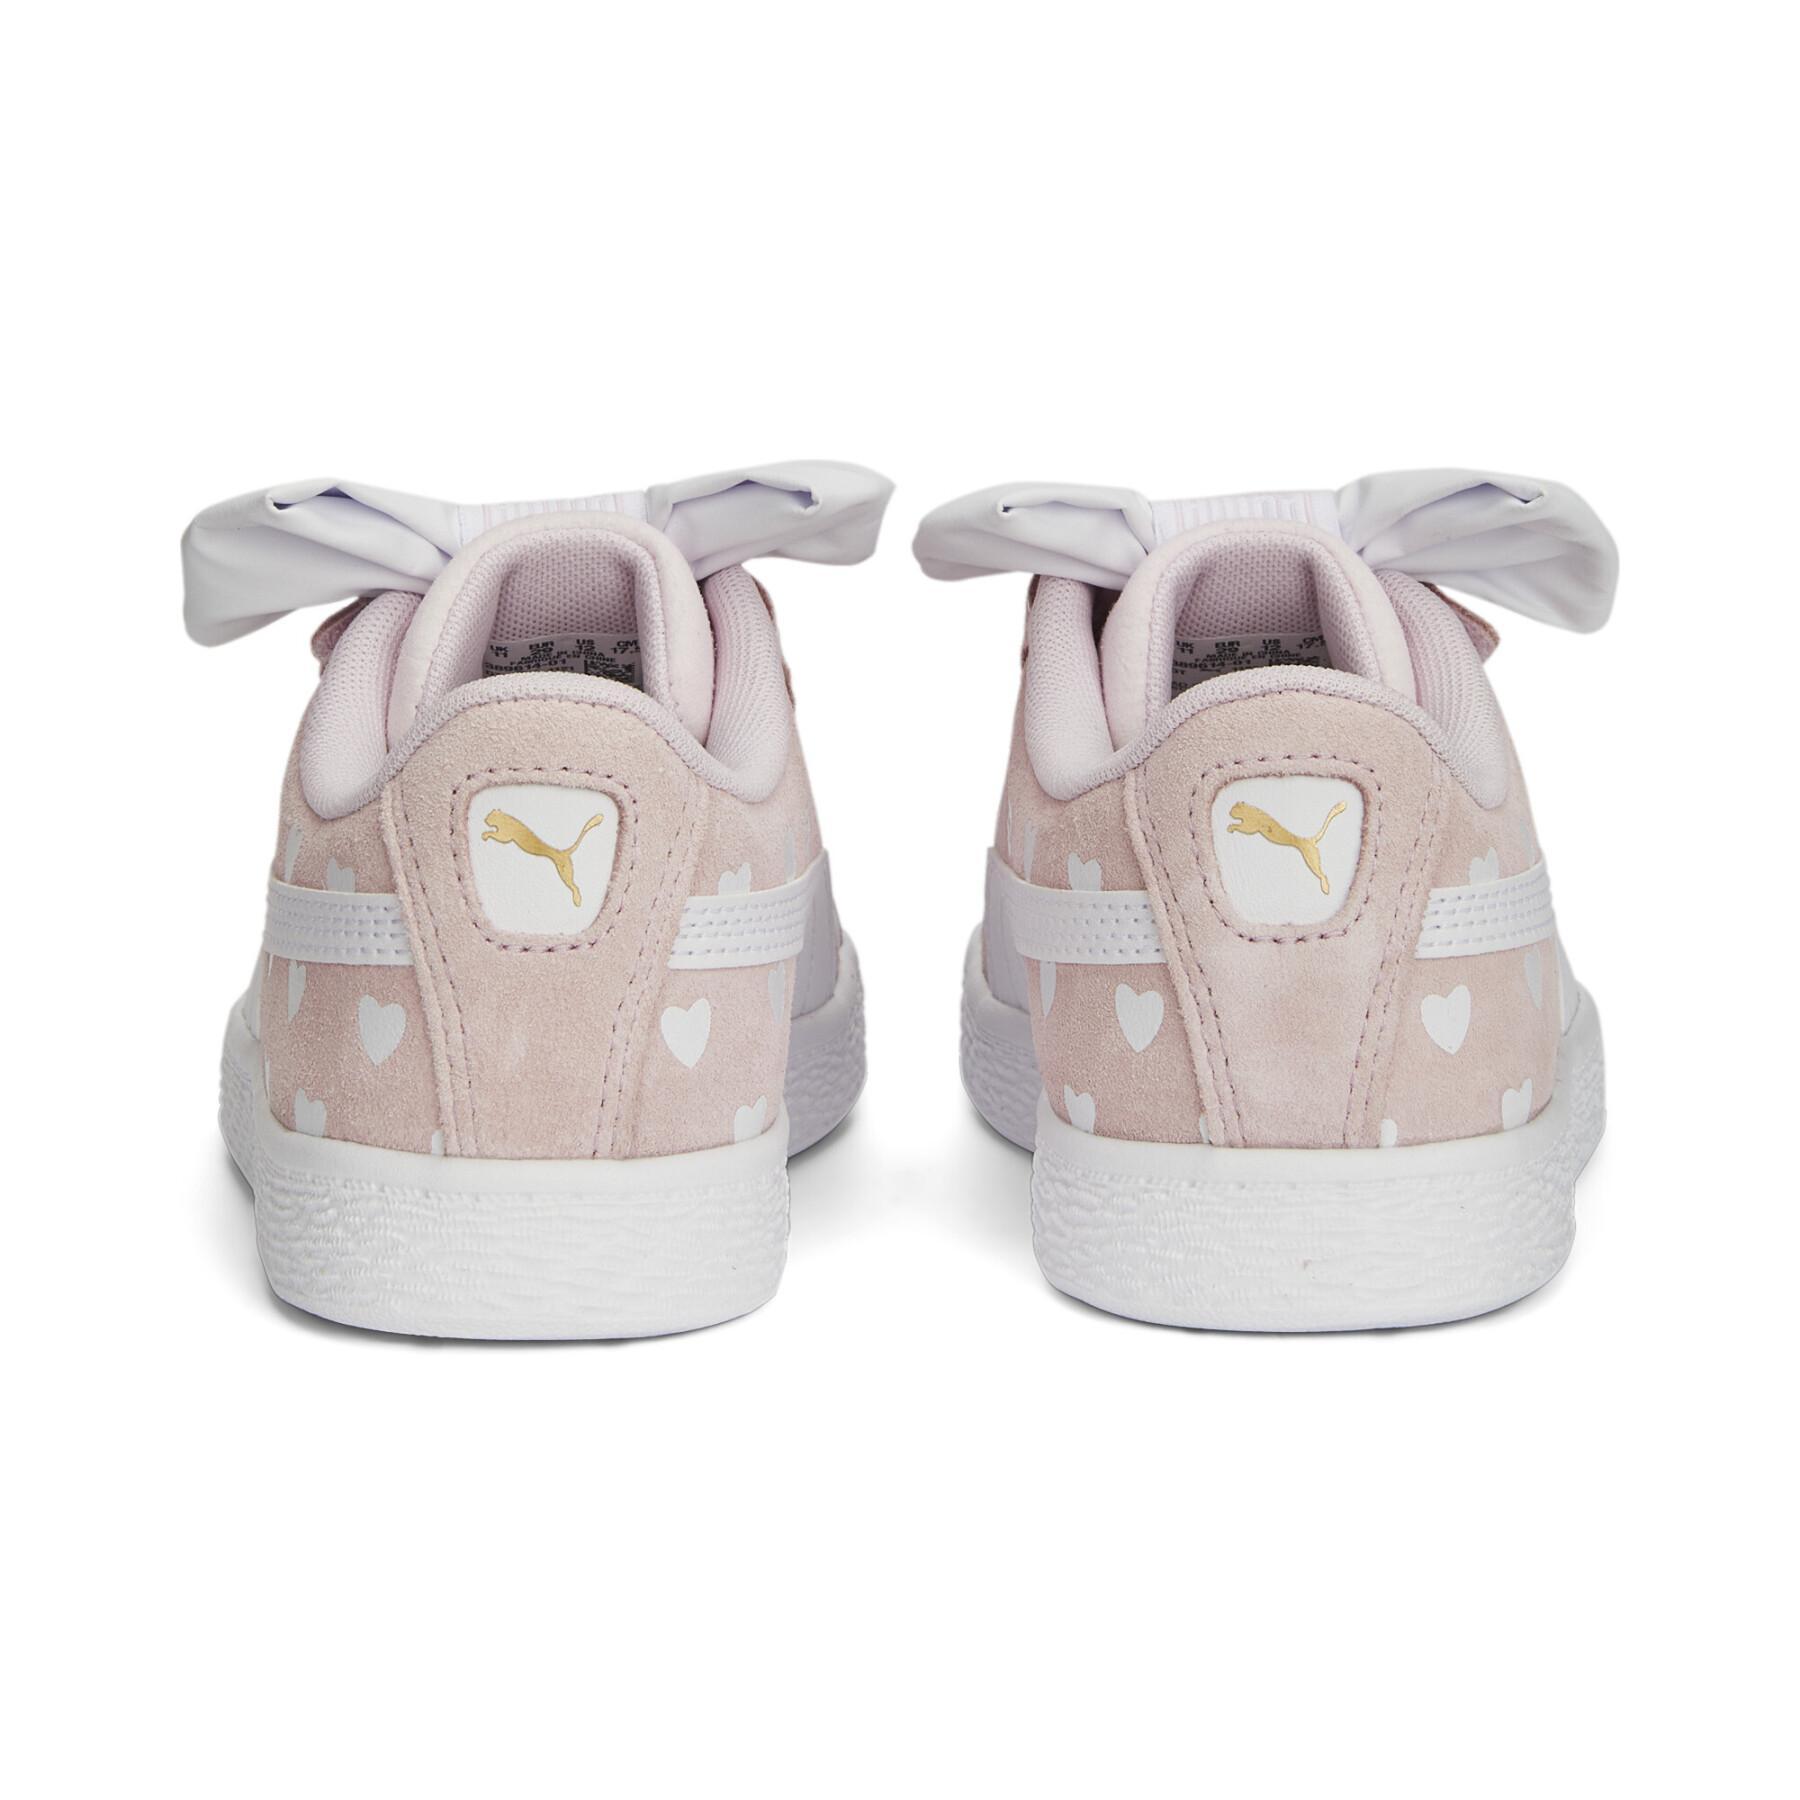 Girl sneakers Puma Suede Classic LF Re-Bow V PS